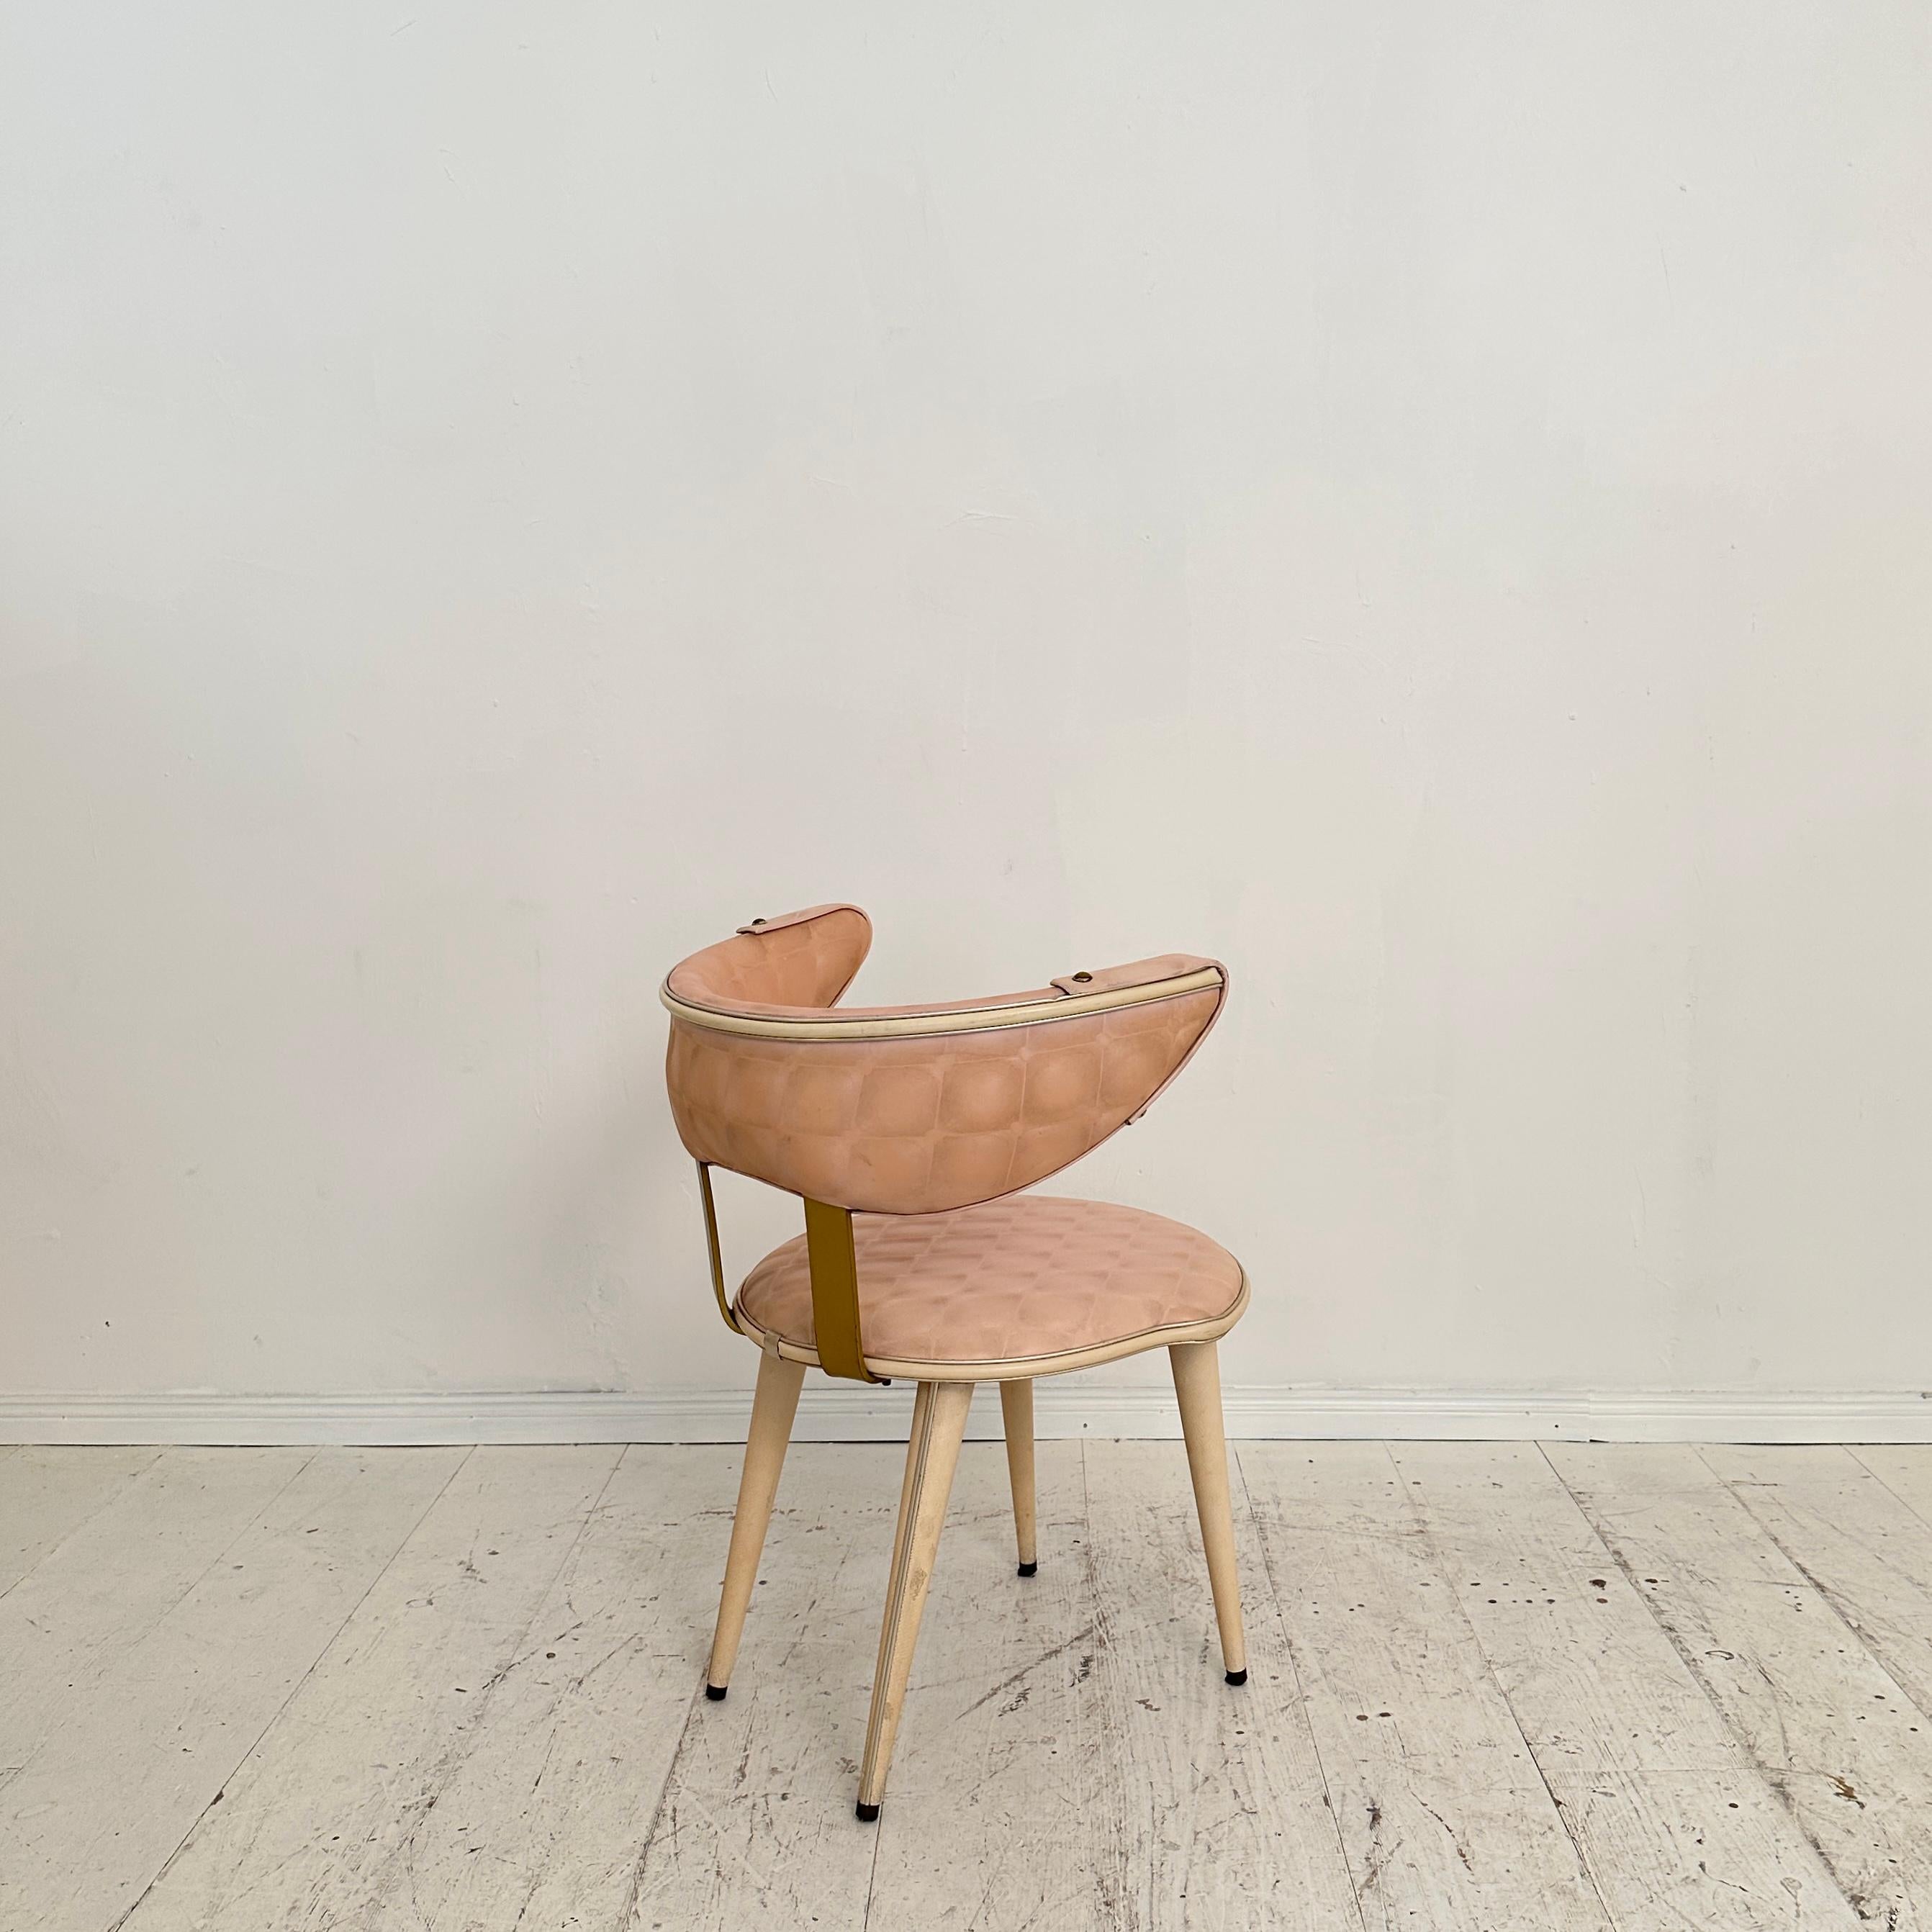 Pair of Mid Century Armchairs by Umberto Mascagni, light pink and white, 1954 For Sale 9